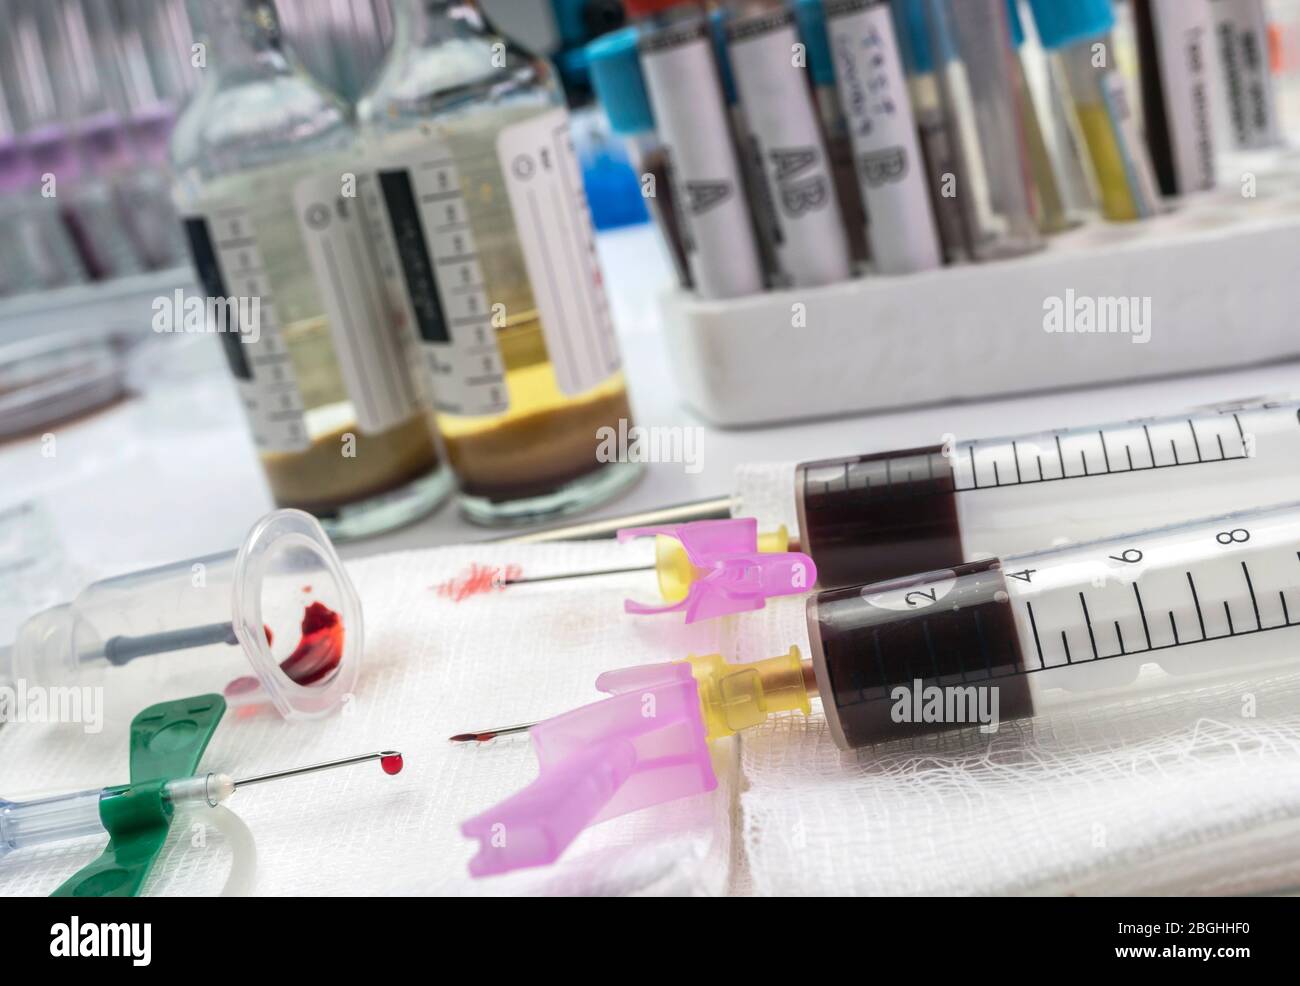 Aerobic and anaerobic blood culture sampling in a hospital, Spain Stock Photo